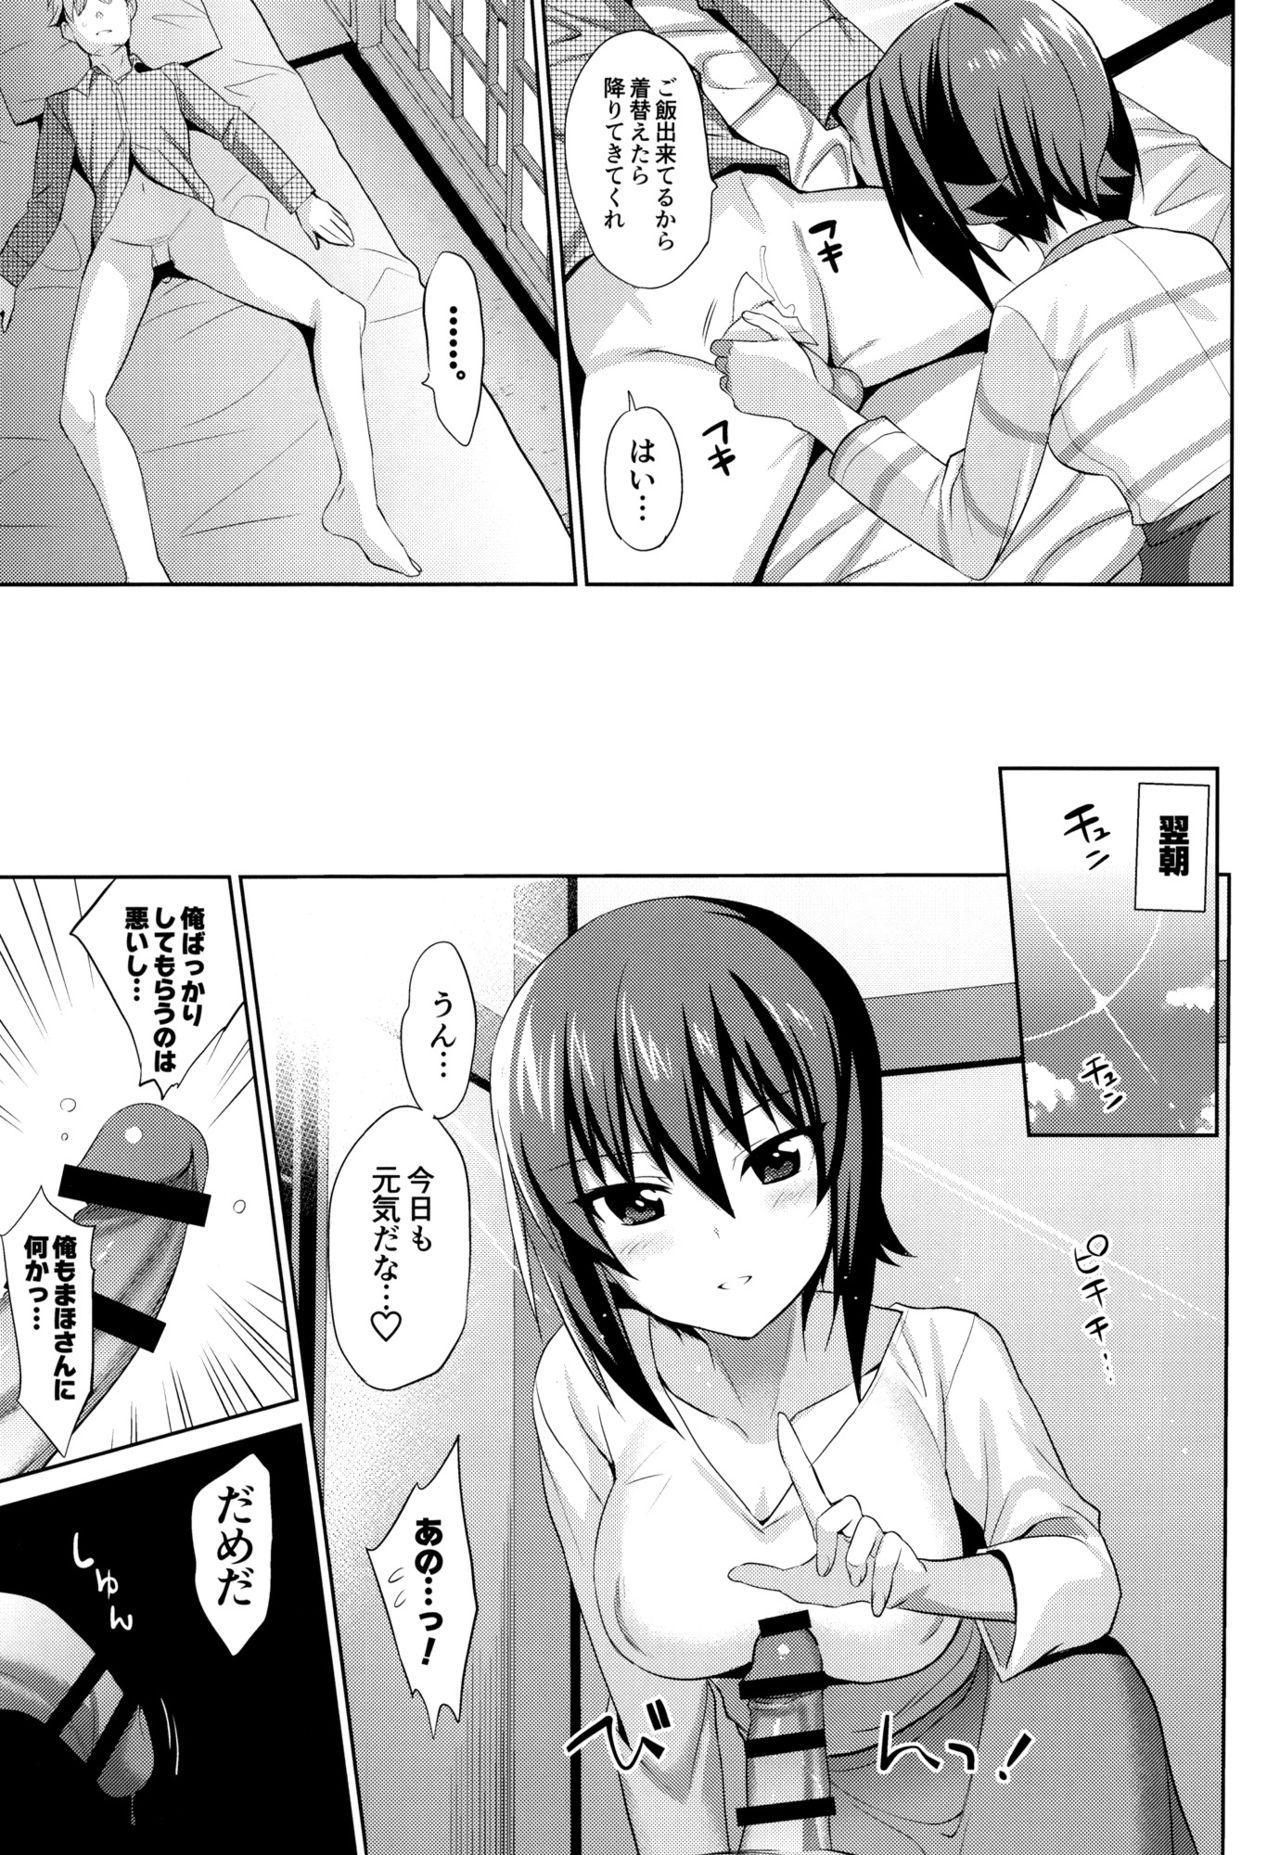 Tugjob LET ME LOVE YOU TOO - Girls und panzer Indonesian - Page 10